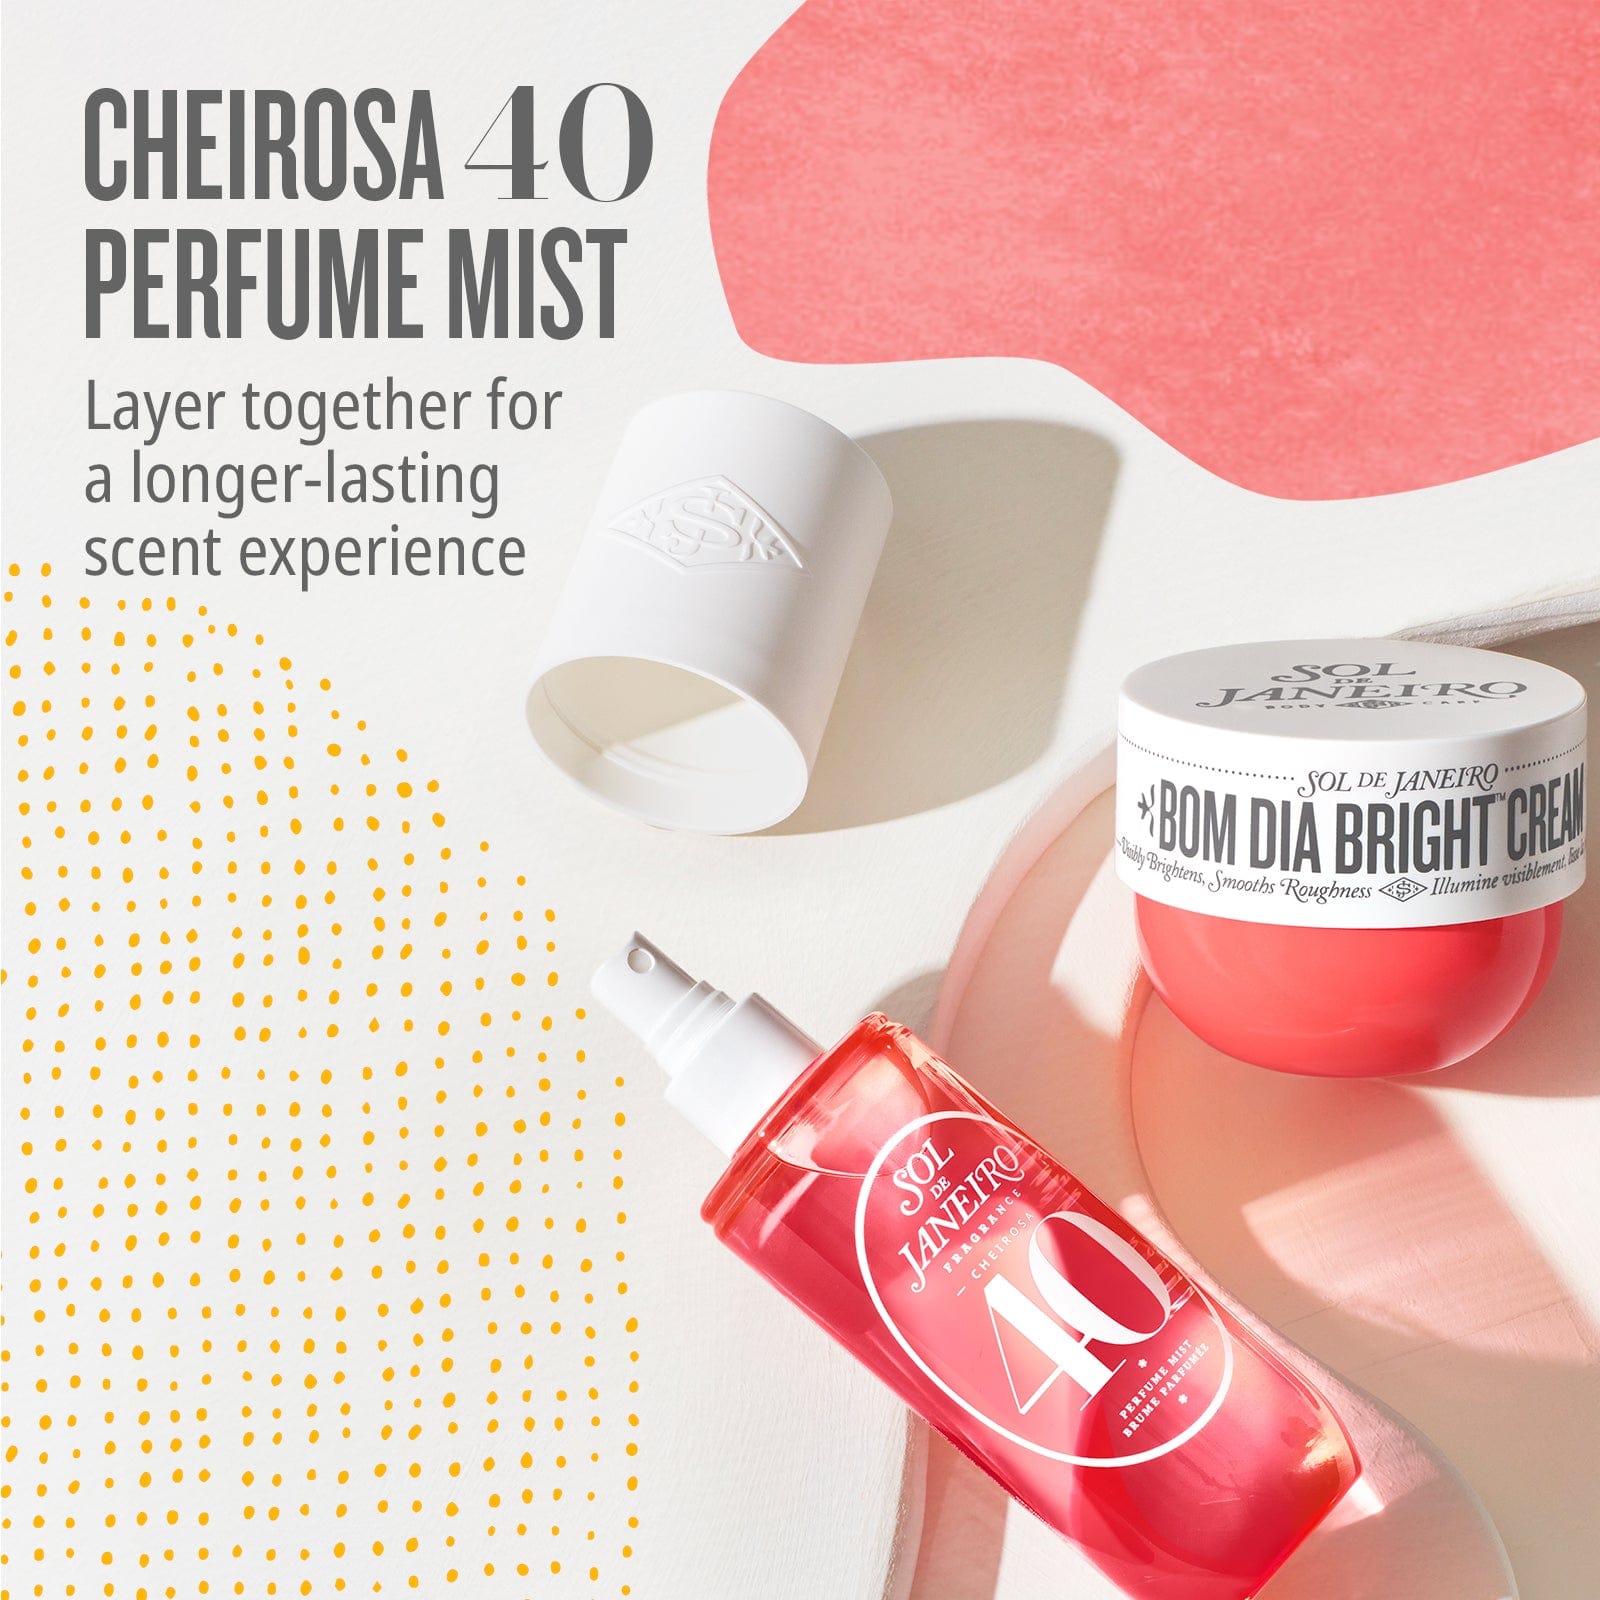 Cheirosa 40 perfume mist layer together for a longer-lasting scent experience